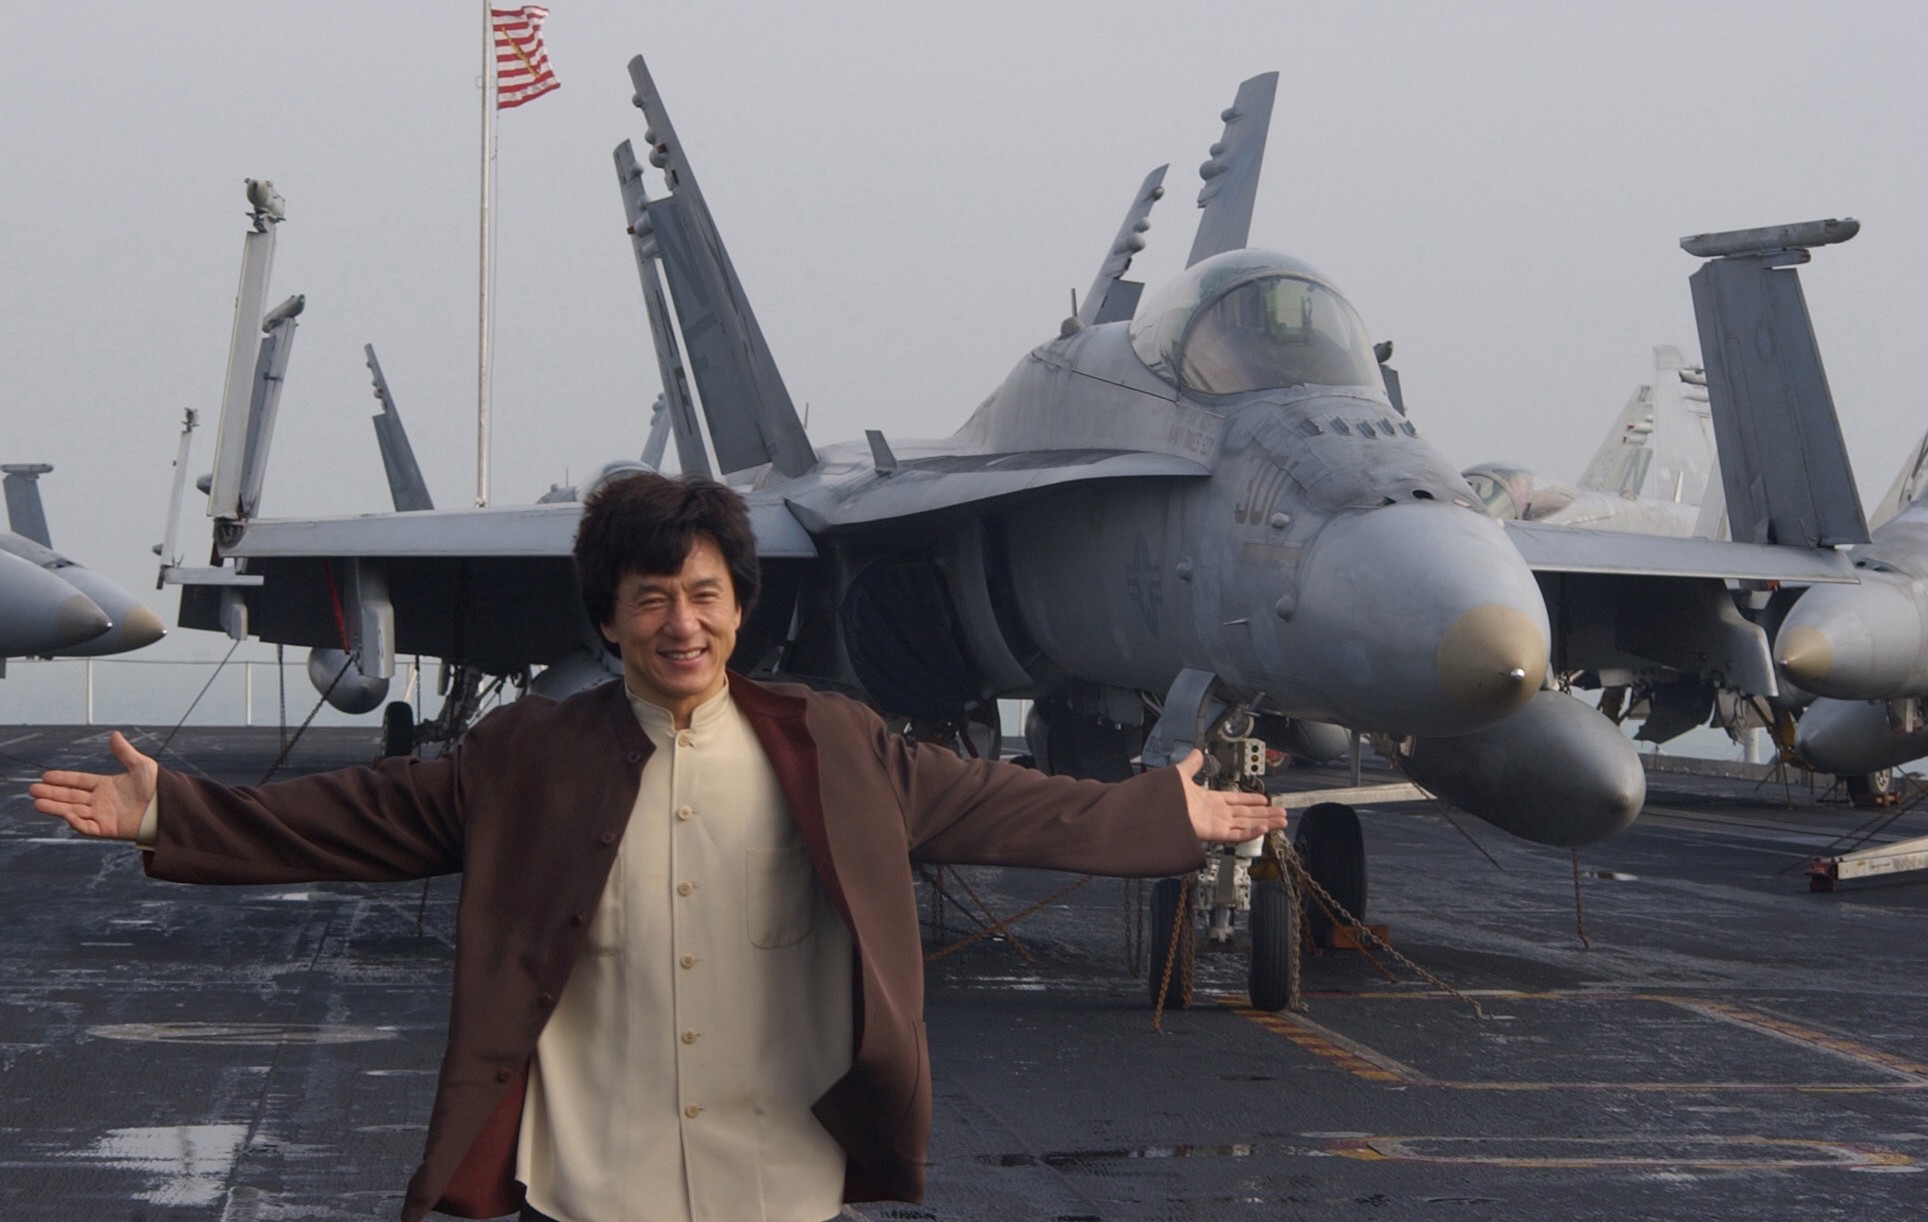 vfa-192 golden dragons strike fighter squadron navy f/a-18c hornet carrier air wing cvw-5 uss kitty hawk cv-63 114 jackie chan